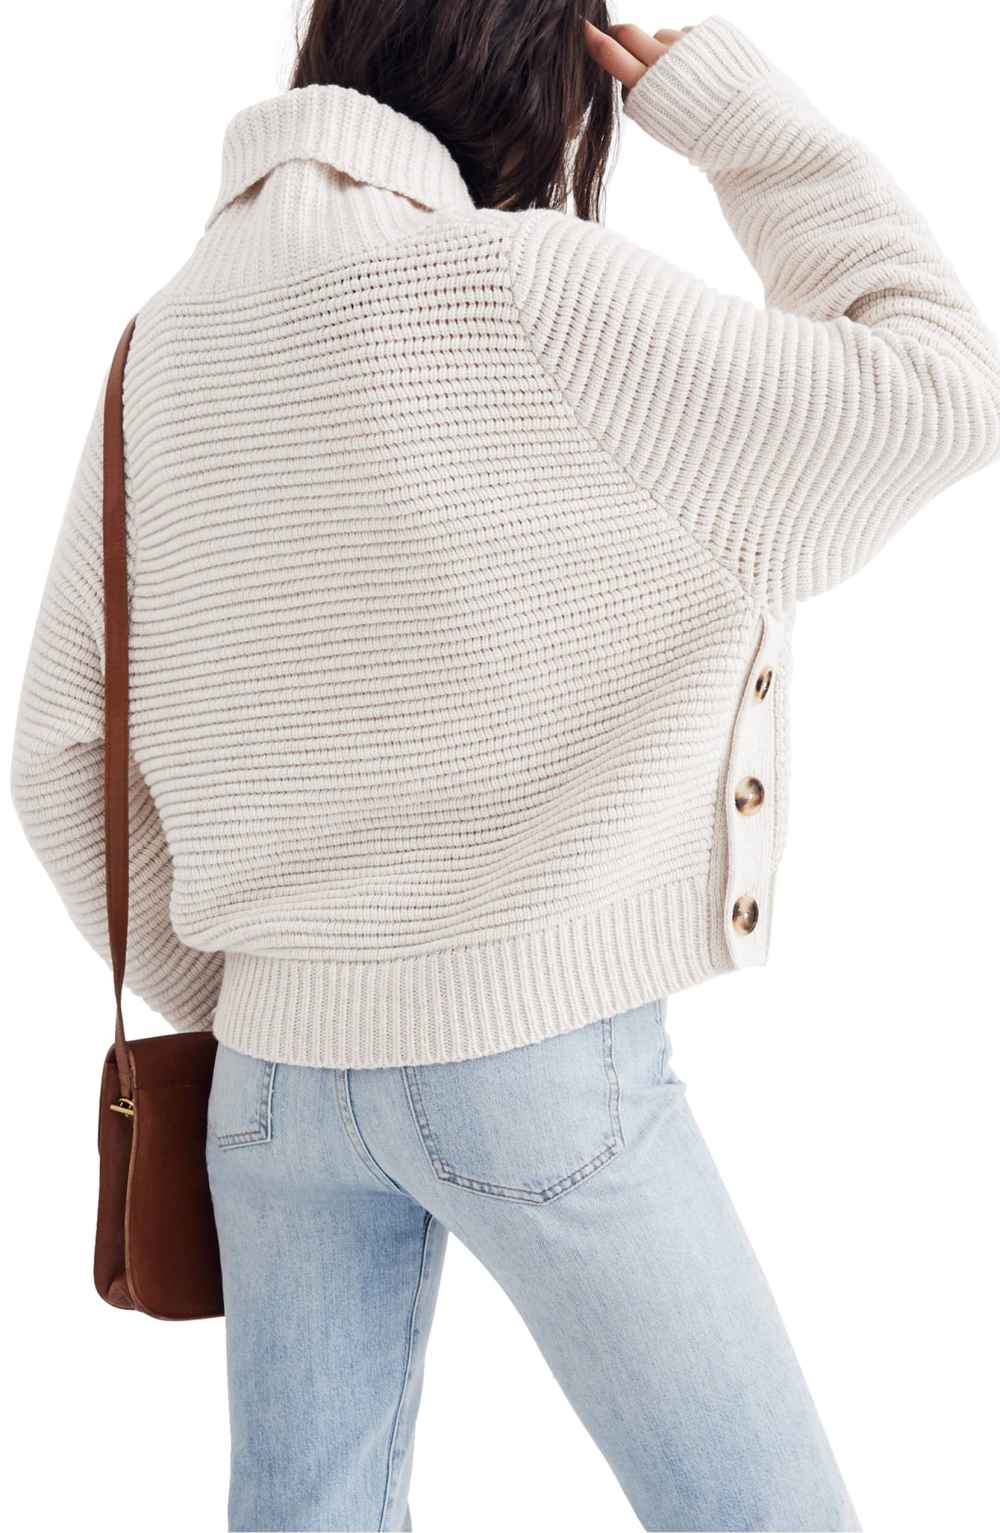 Madewell Side Button Turtleneck Sweater